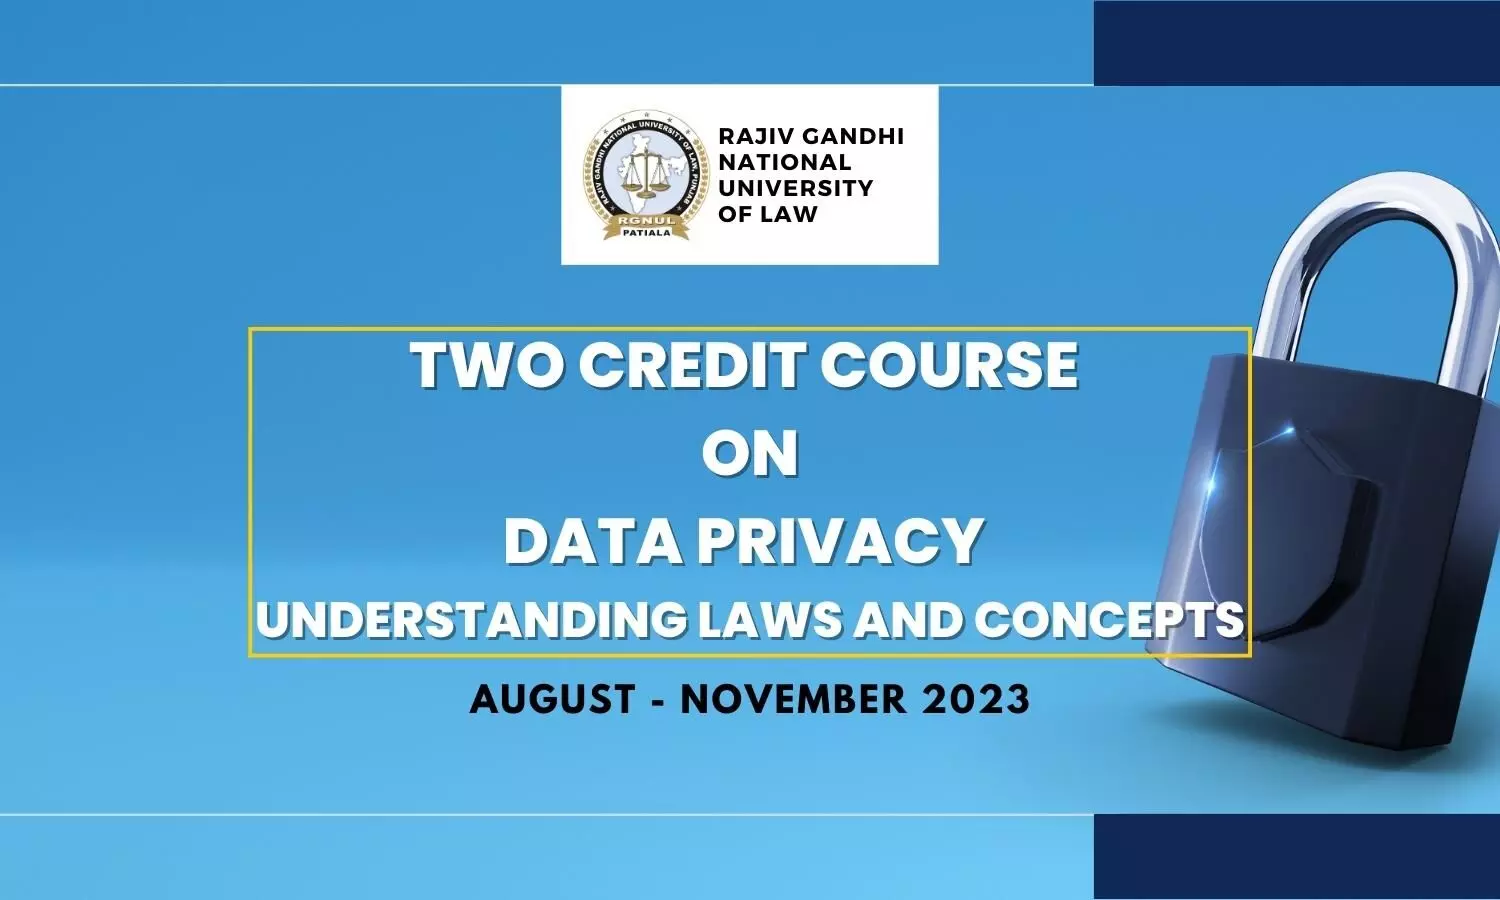 Two Credit Course on Data Privacy - Understanding Laws and Concepts